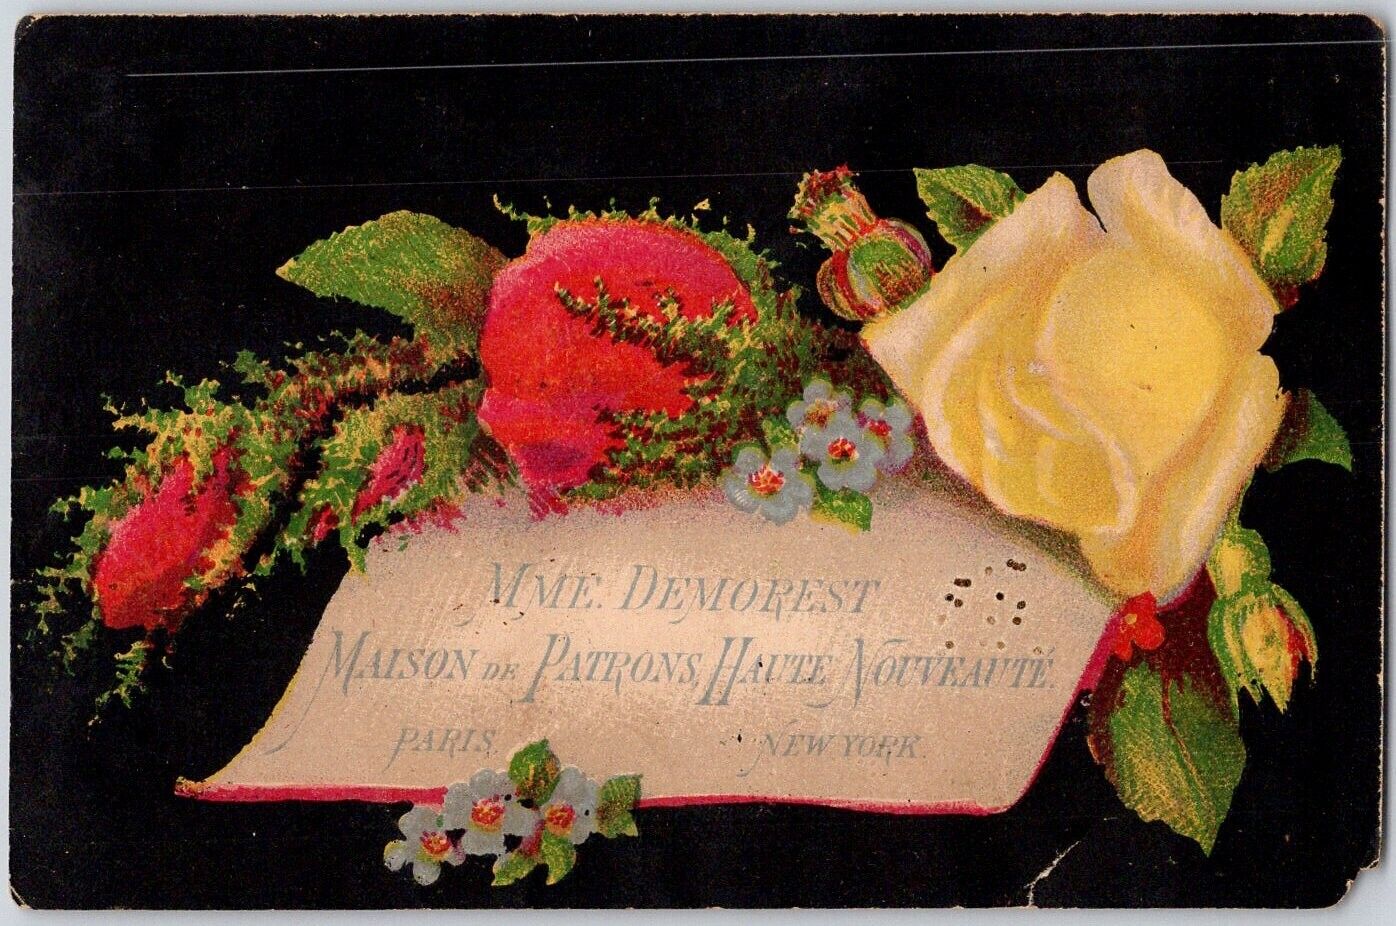 Mme Demorest's Reliable Patterns Victorian Trade Card Mrs. Rowe Utica NY